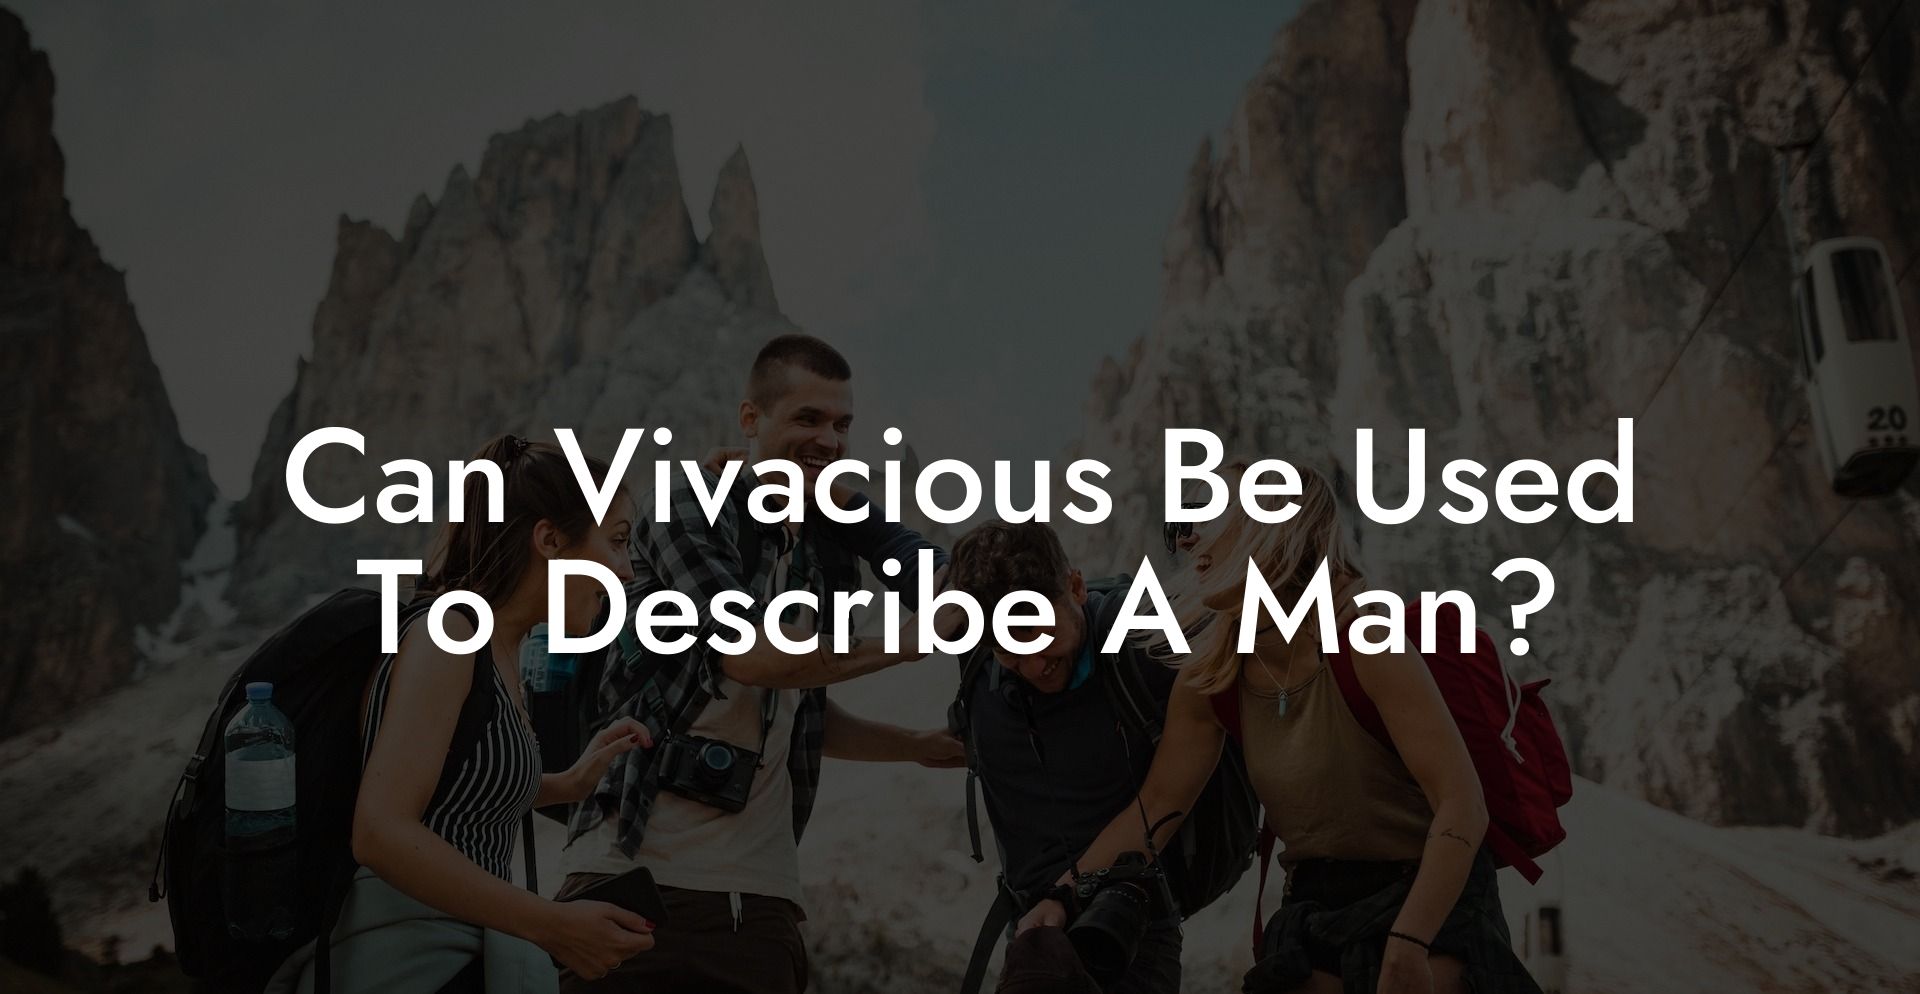 Can Vivacious Be Used To Describe A Man?